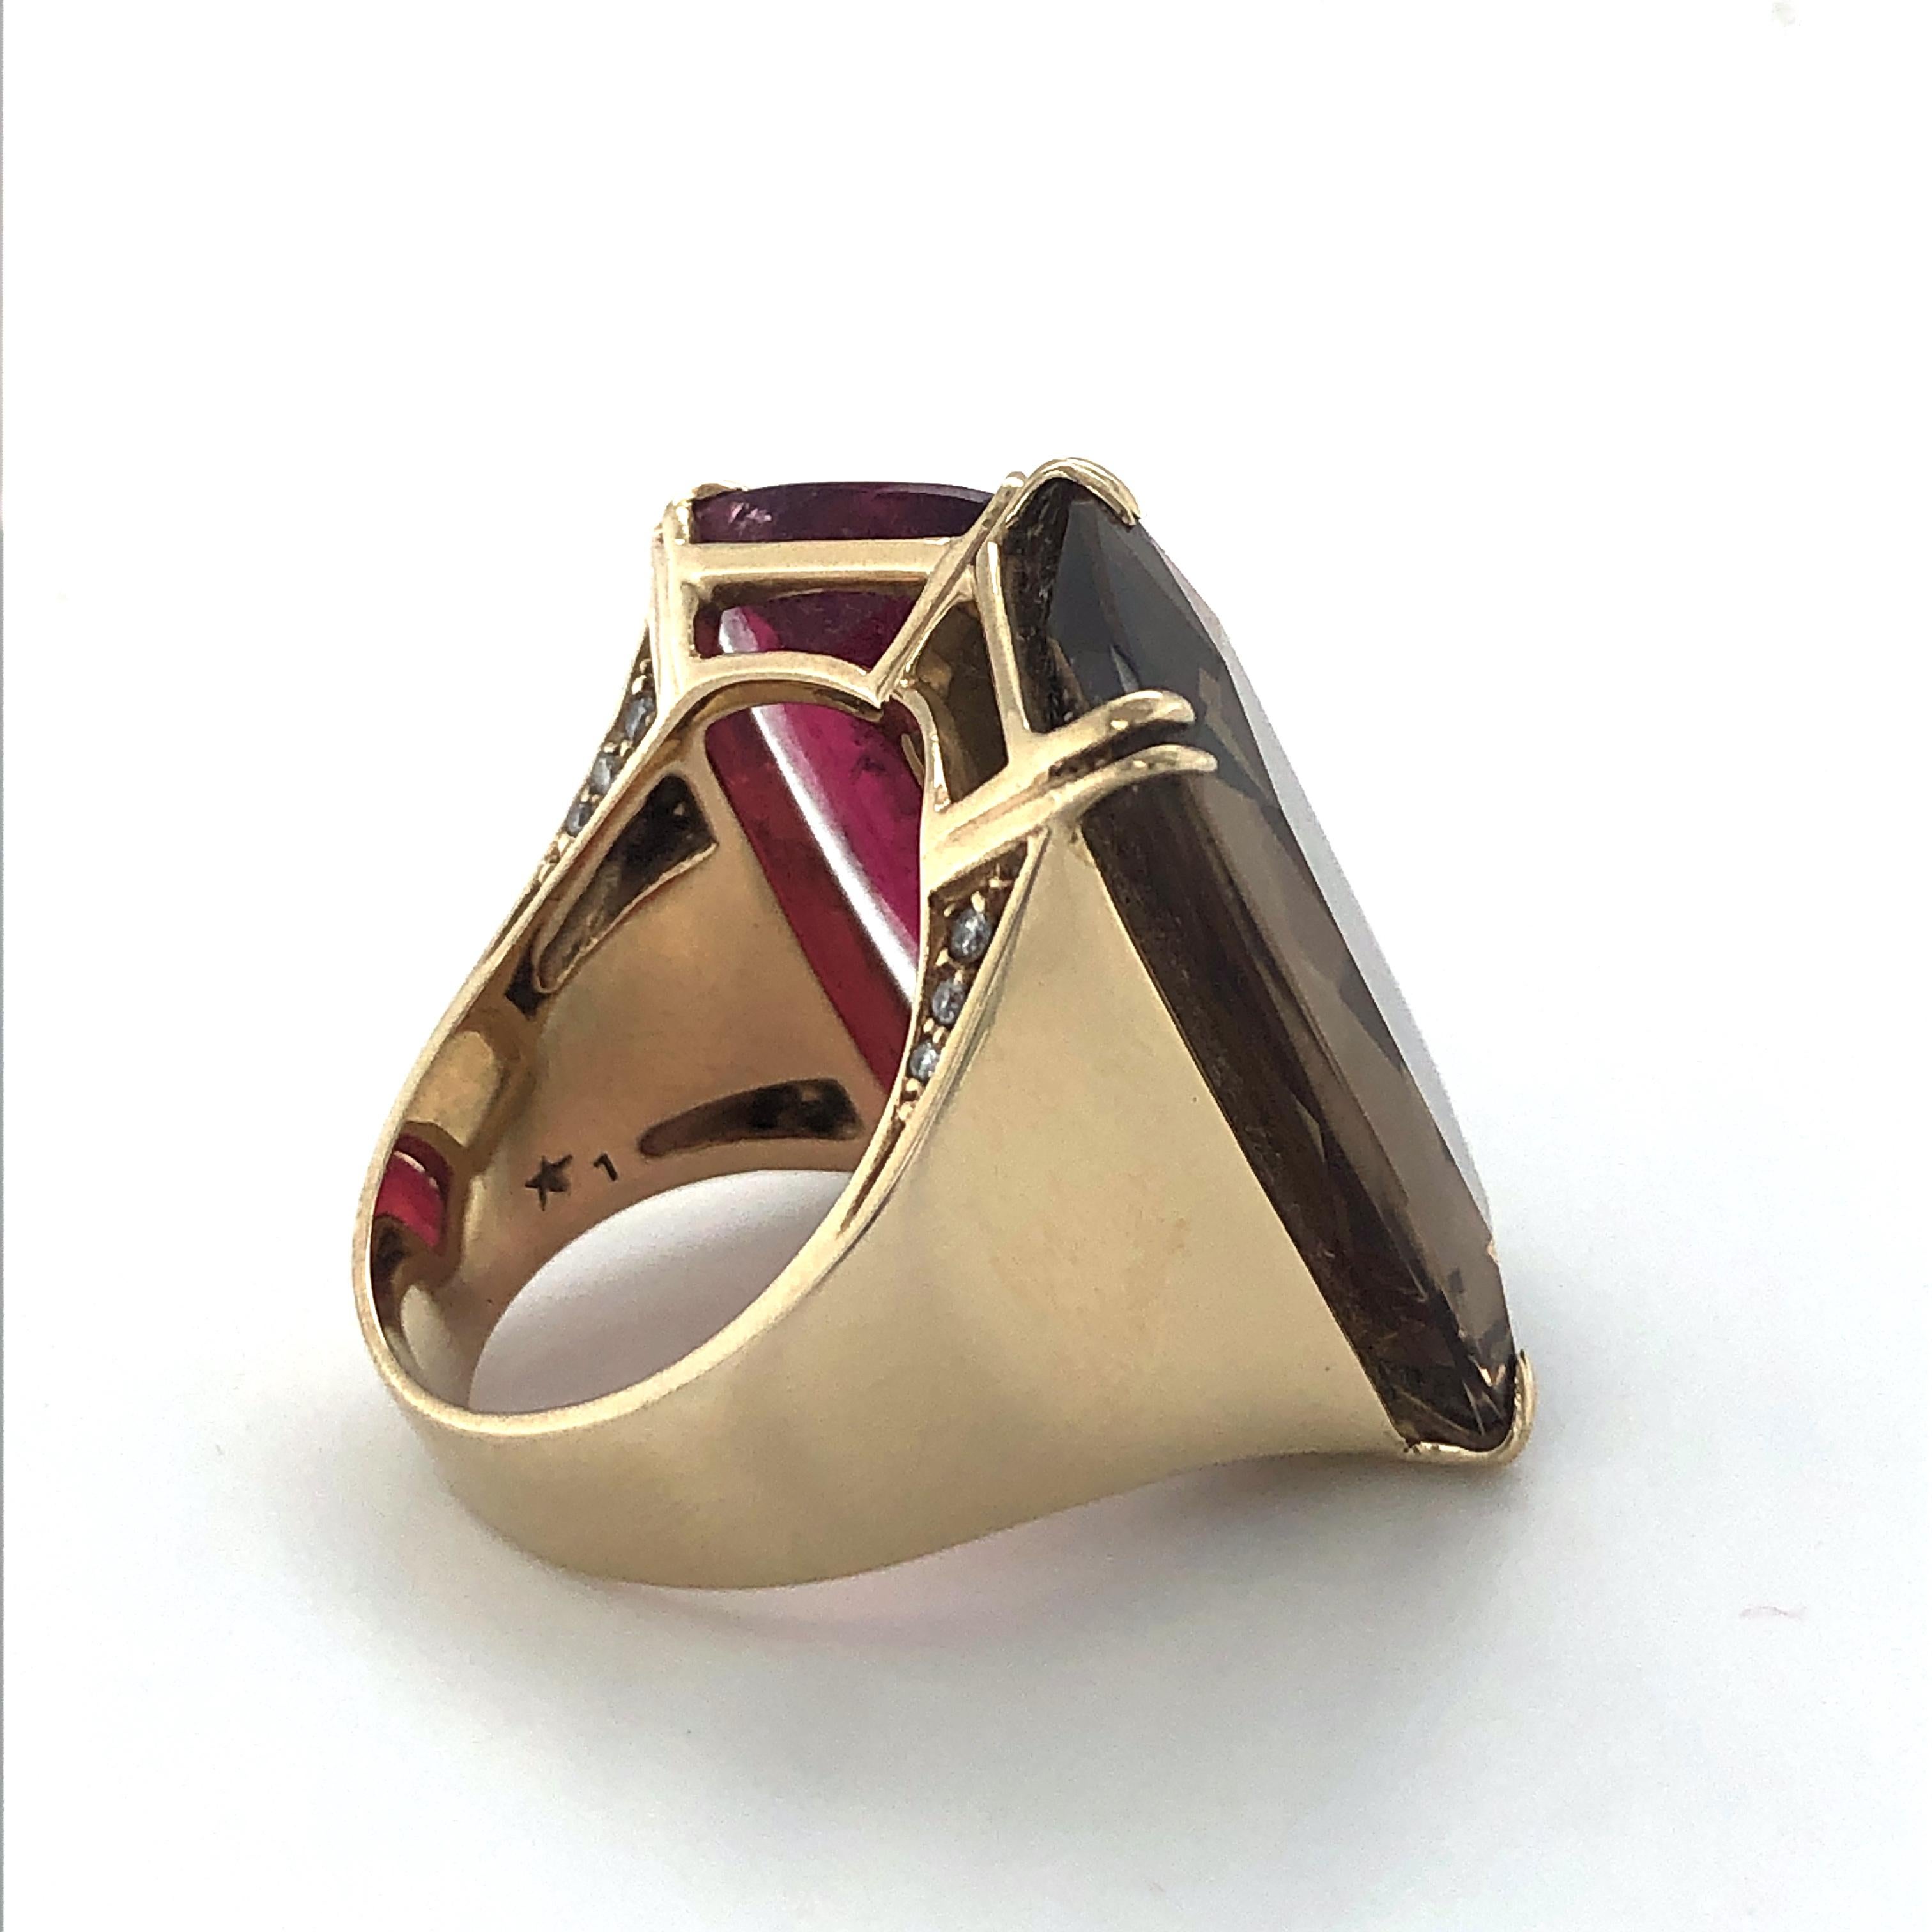 Modern H.Stern Ring with Tourmaline and Smoky Quartz in Yellowgold 750